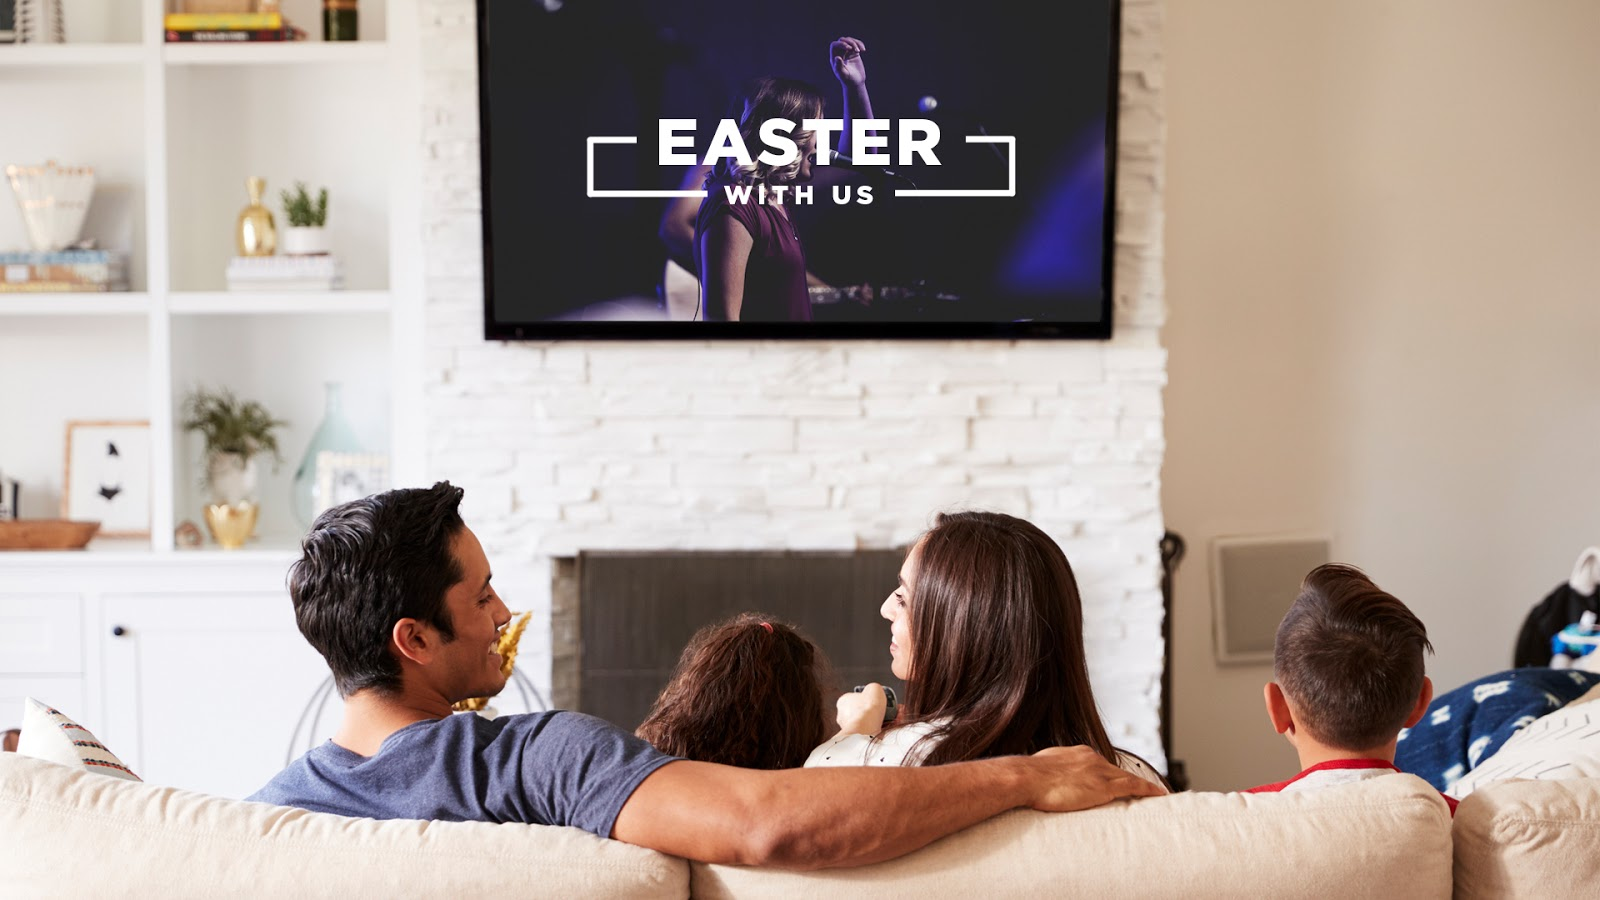 Family at home streaming a church service on their TV